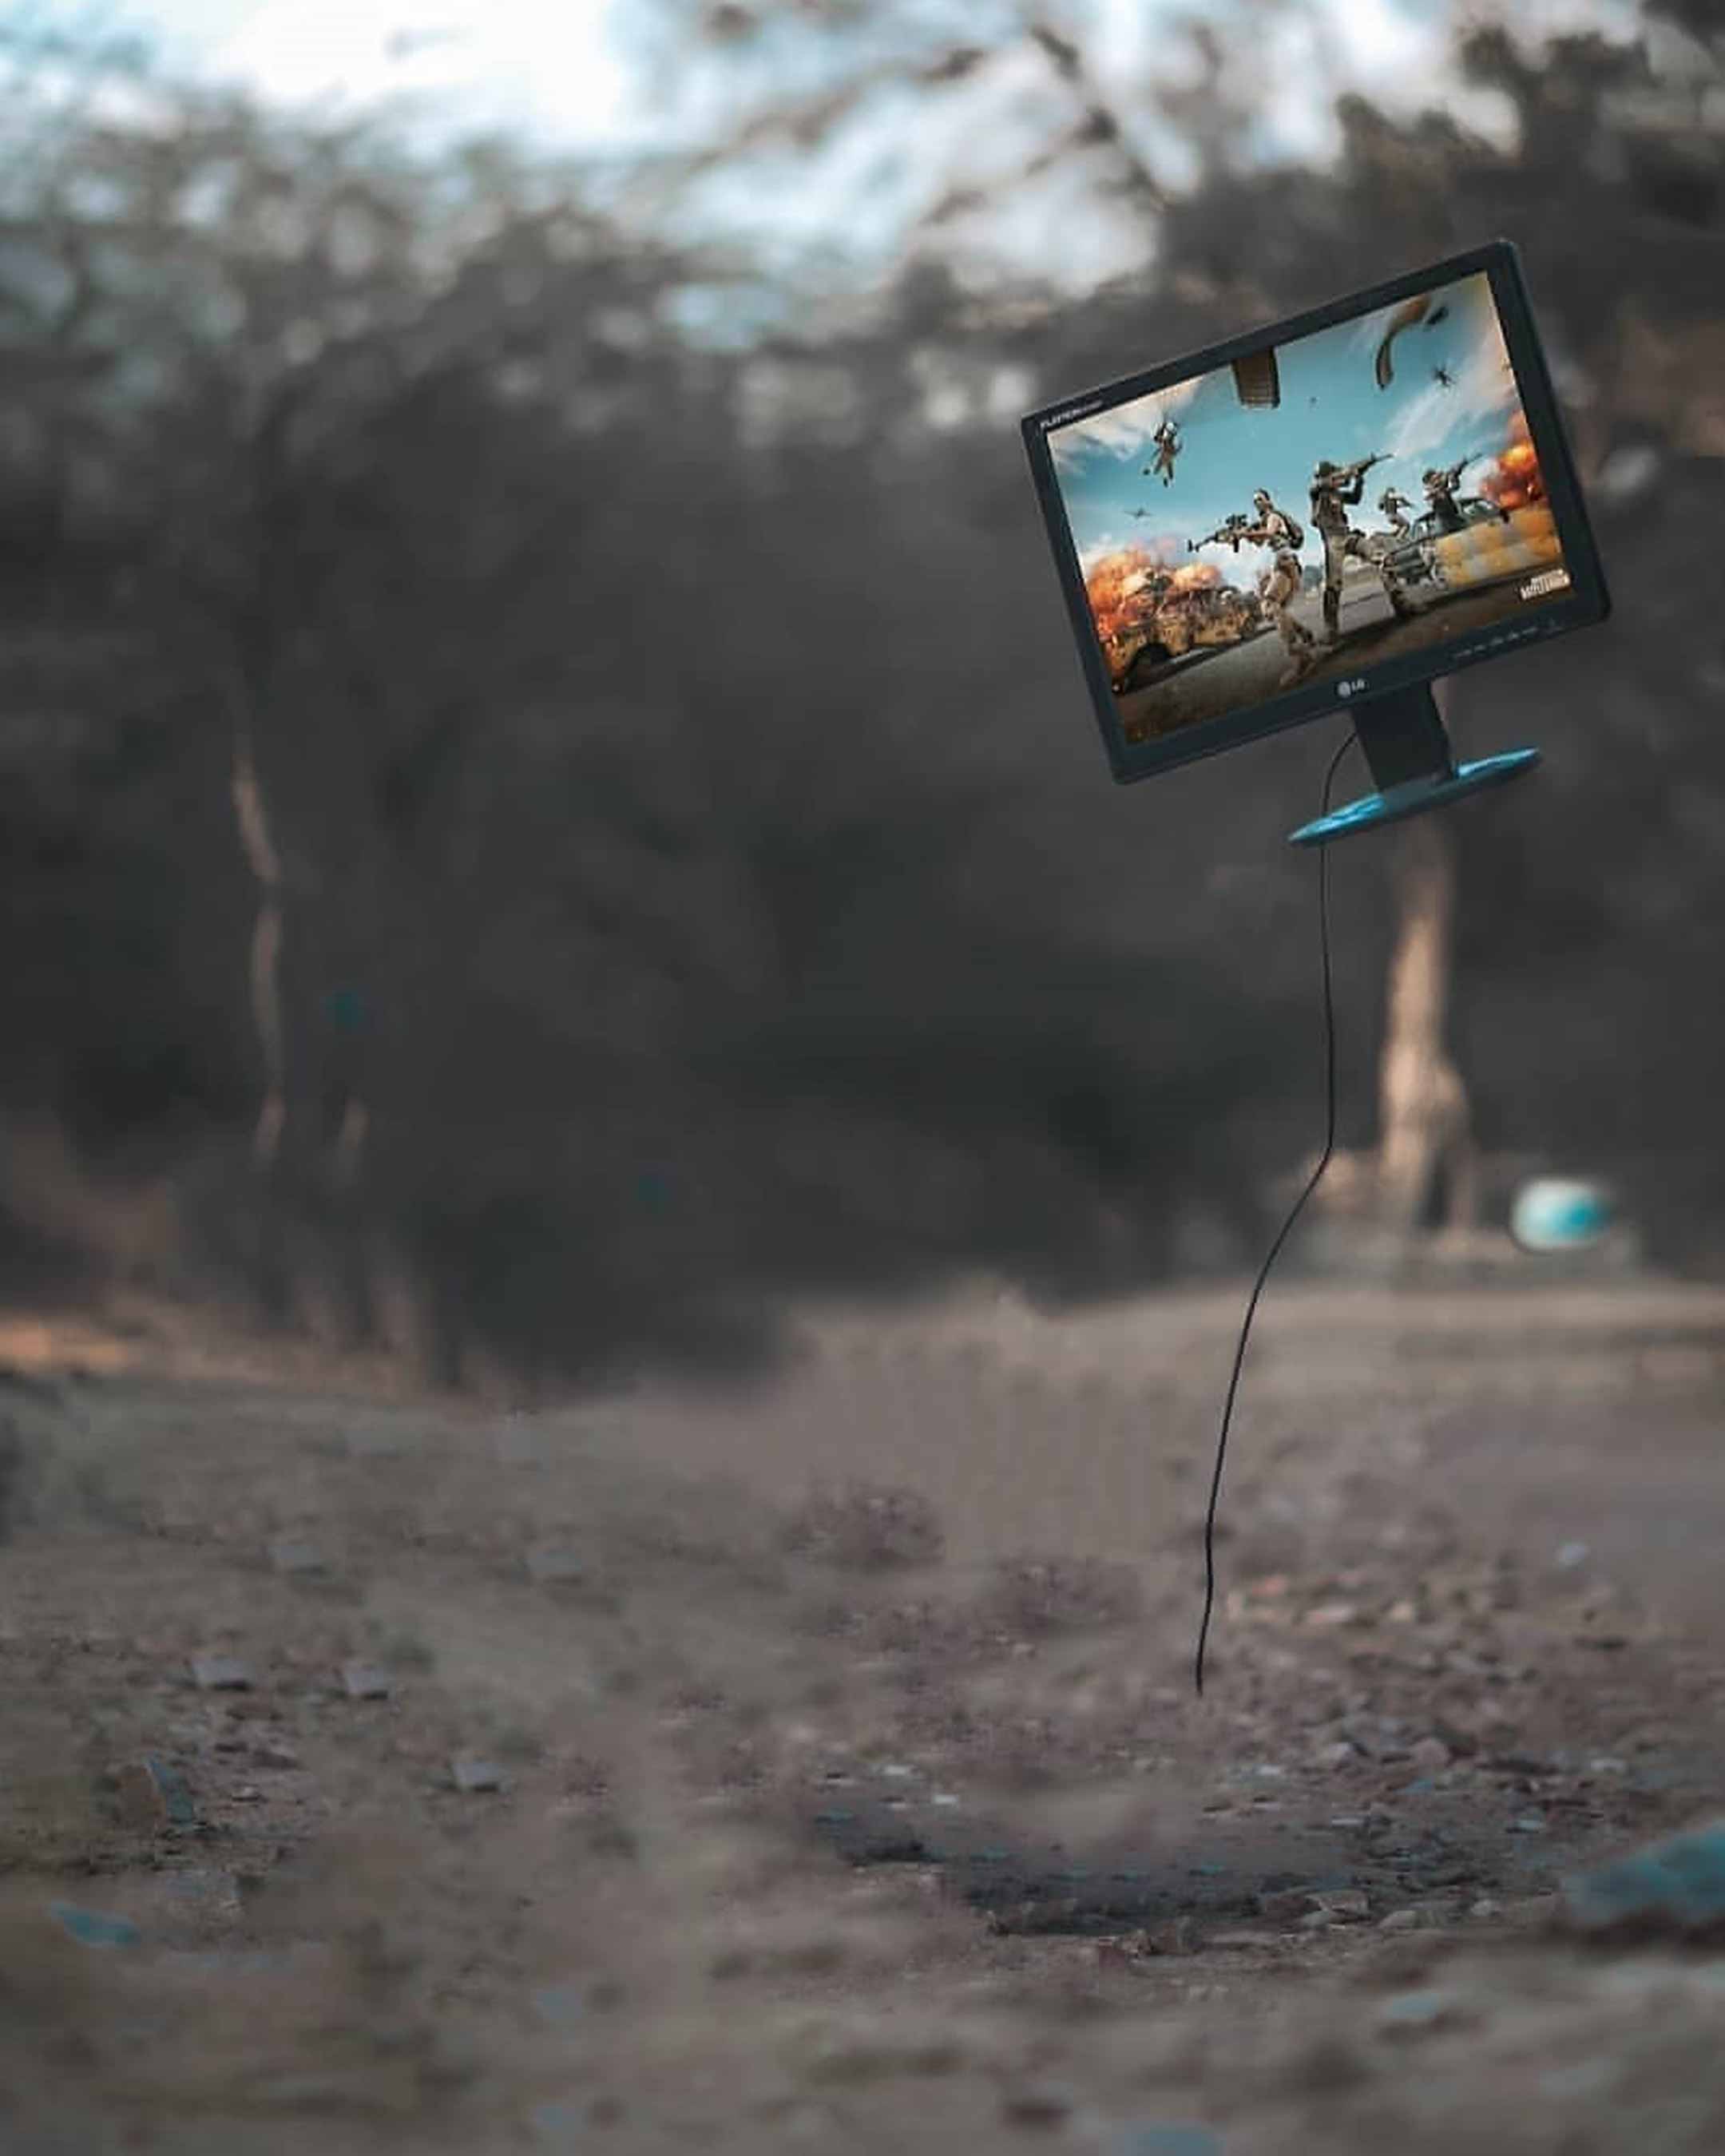 Flying PubG Monitor Snapseed Background Stock Photo